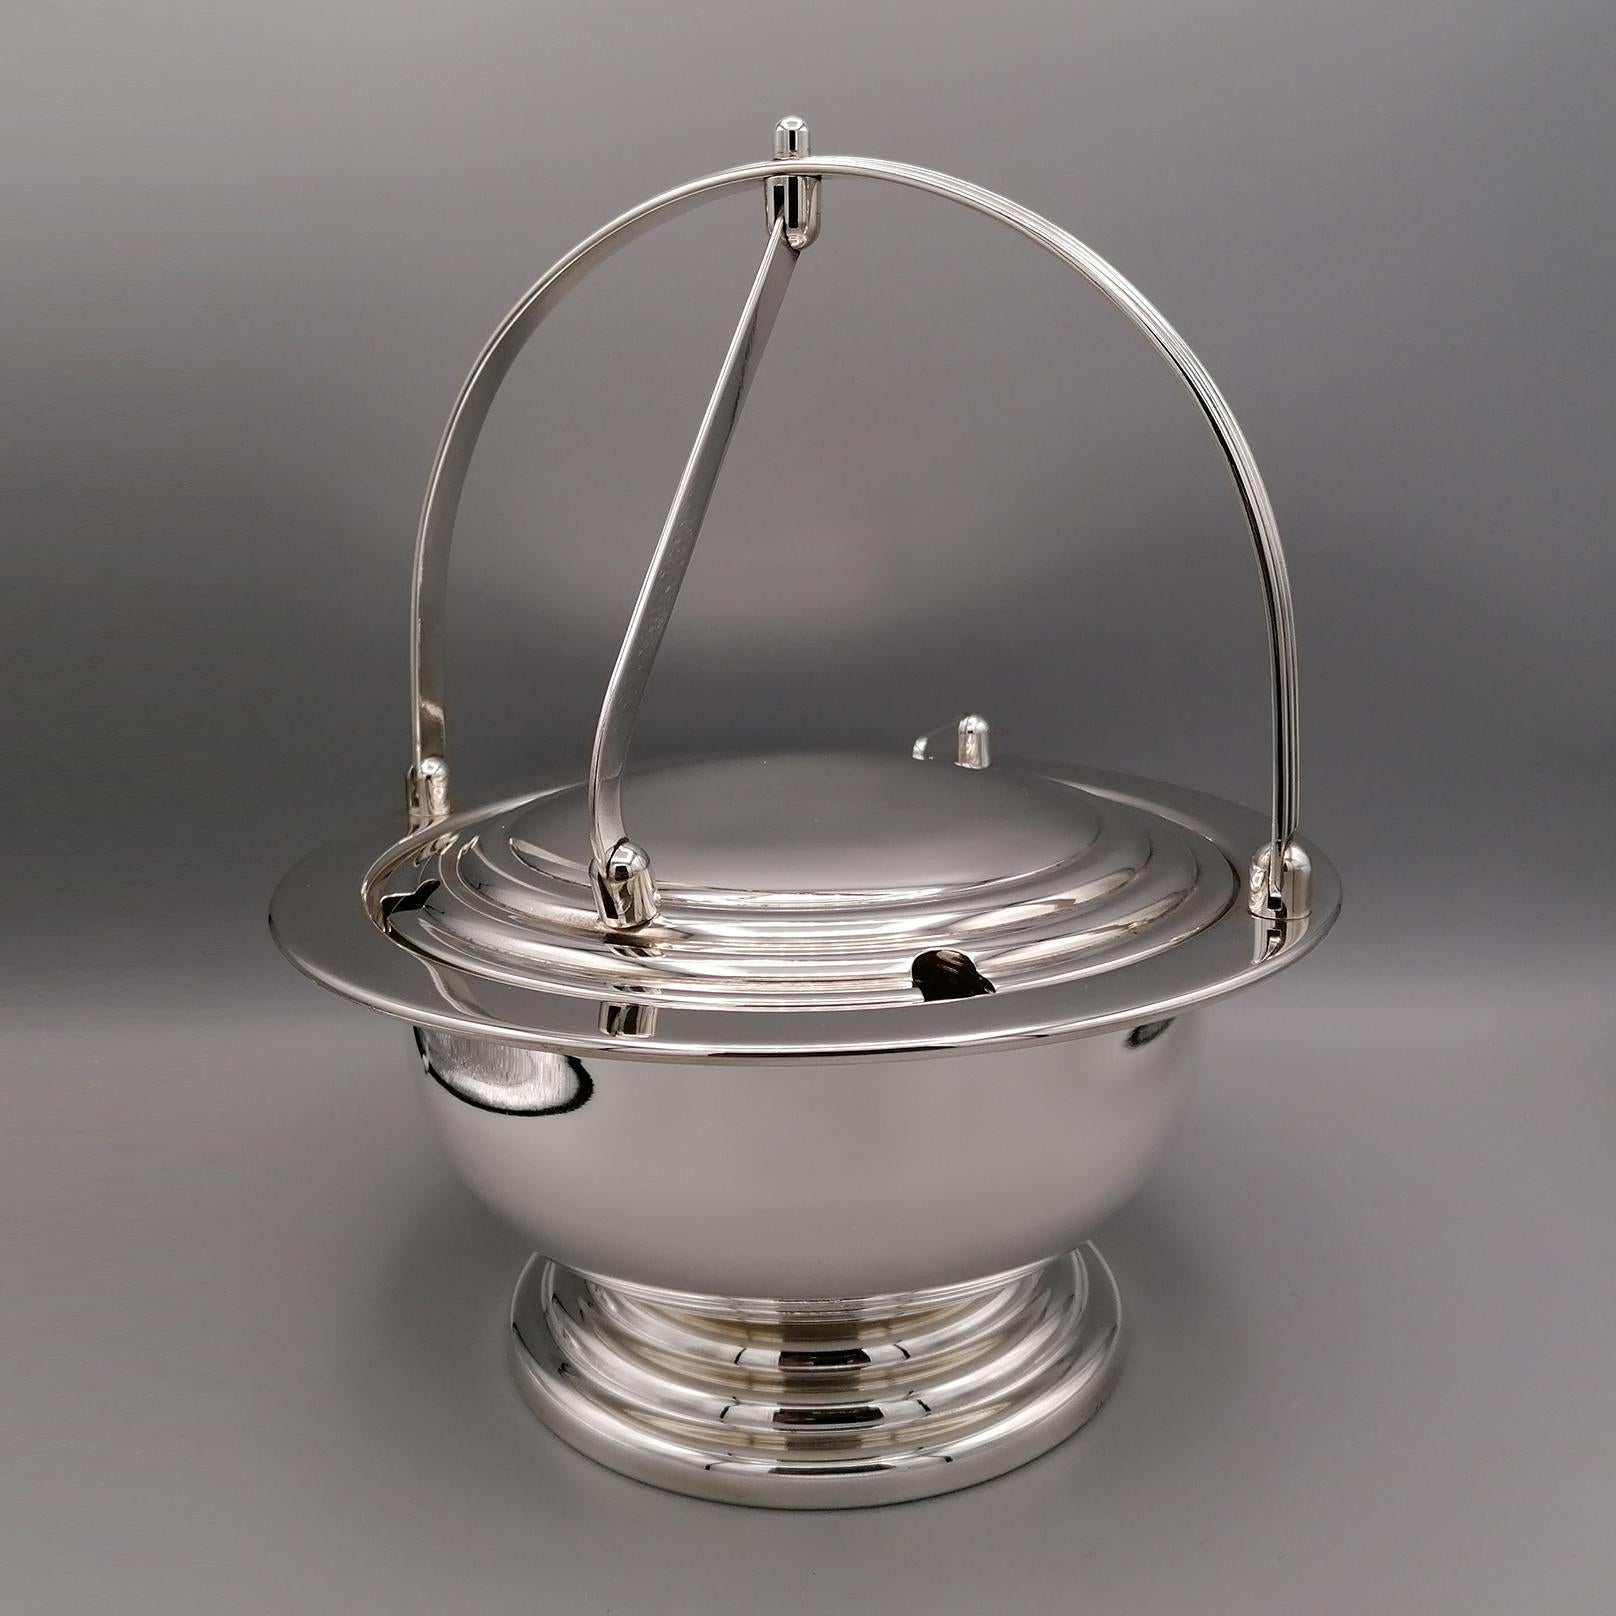 Large sugar bowl in 800 solid silver in the shape of a 